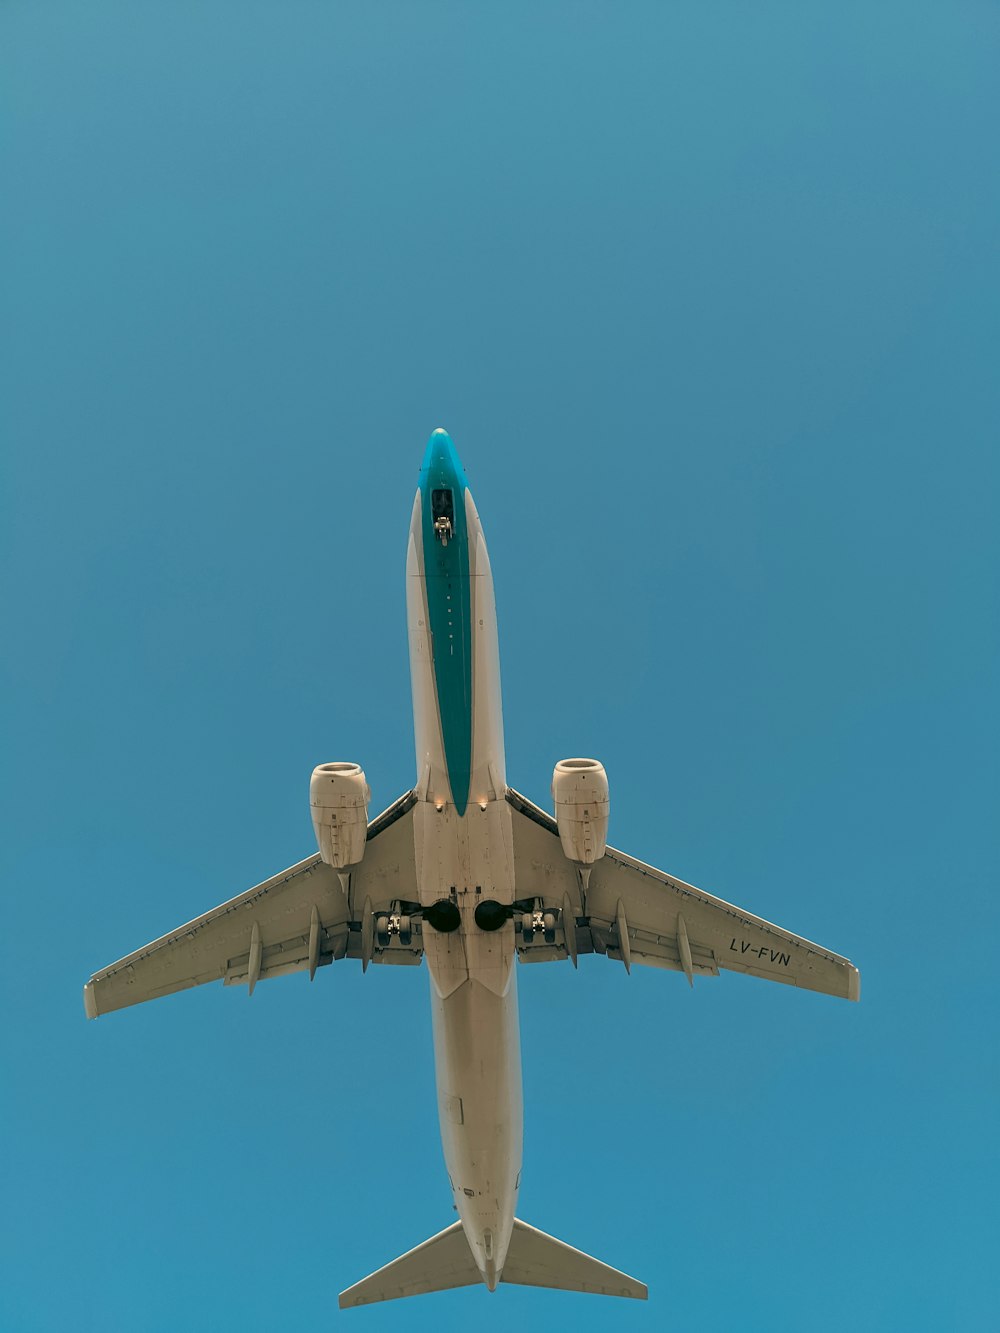 a large airplane flying in the sky